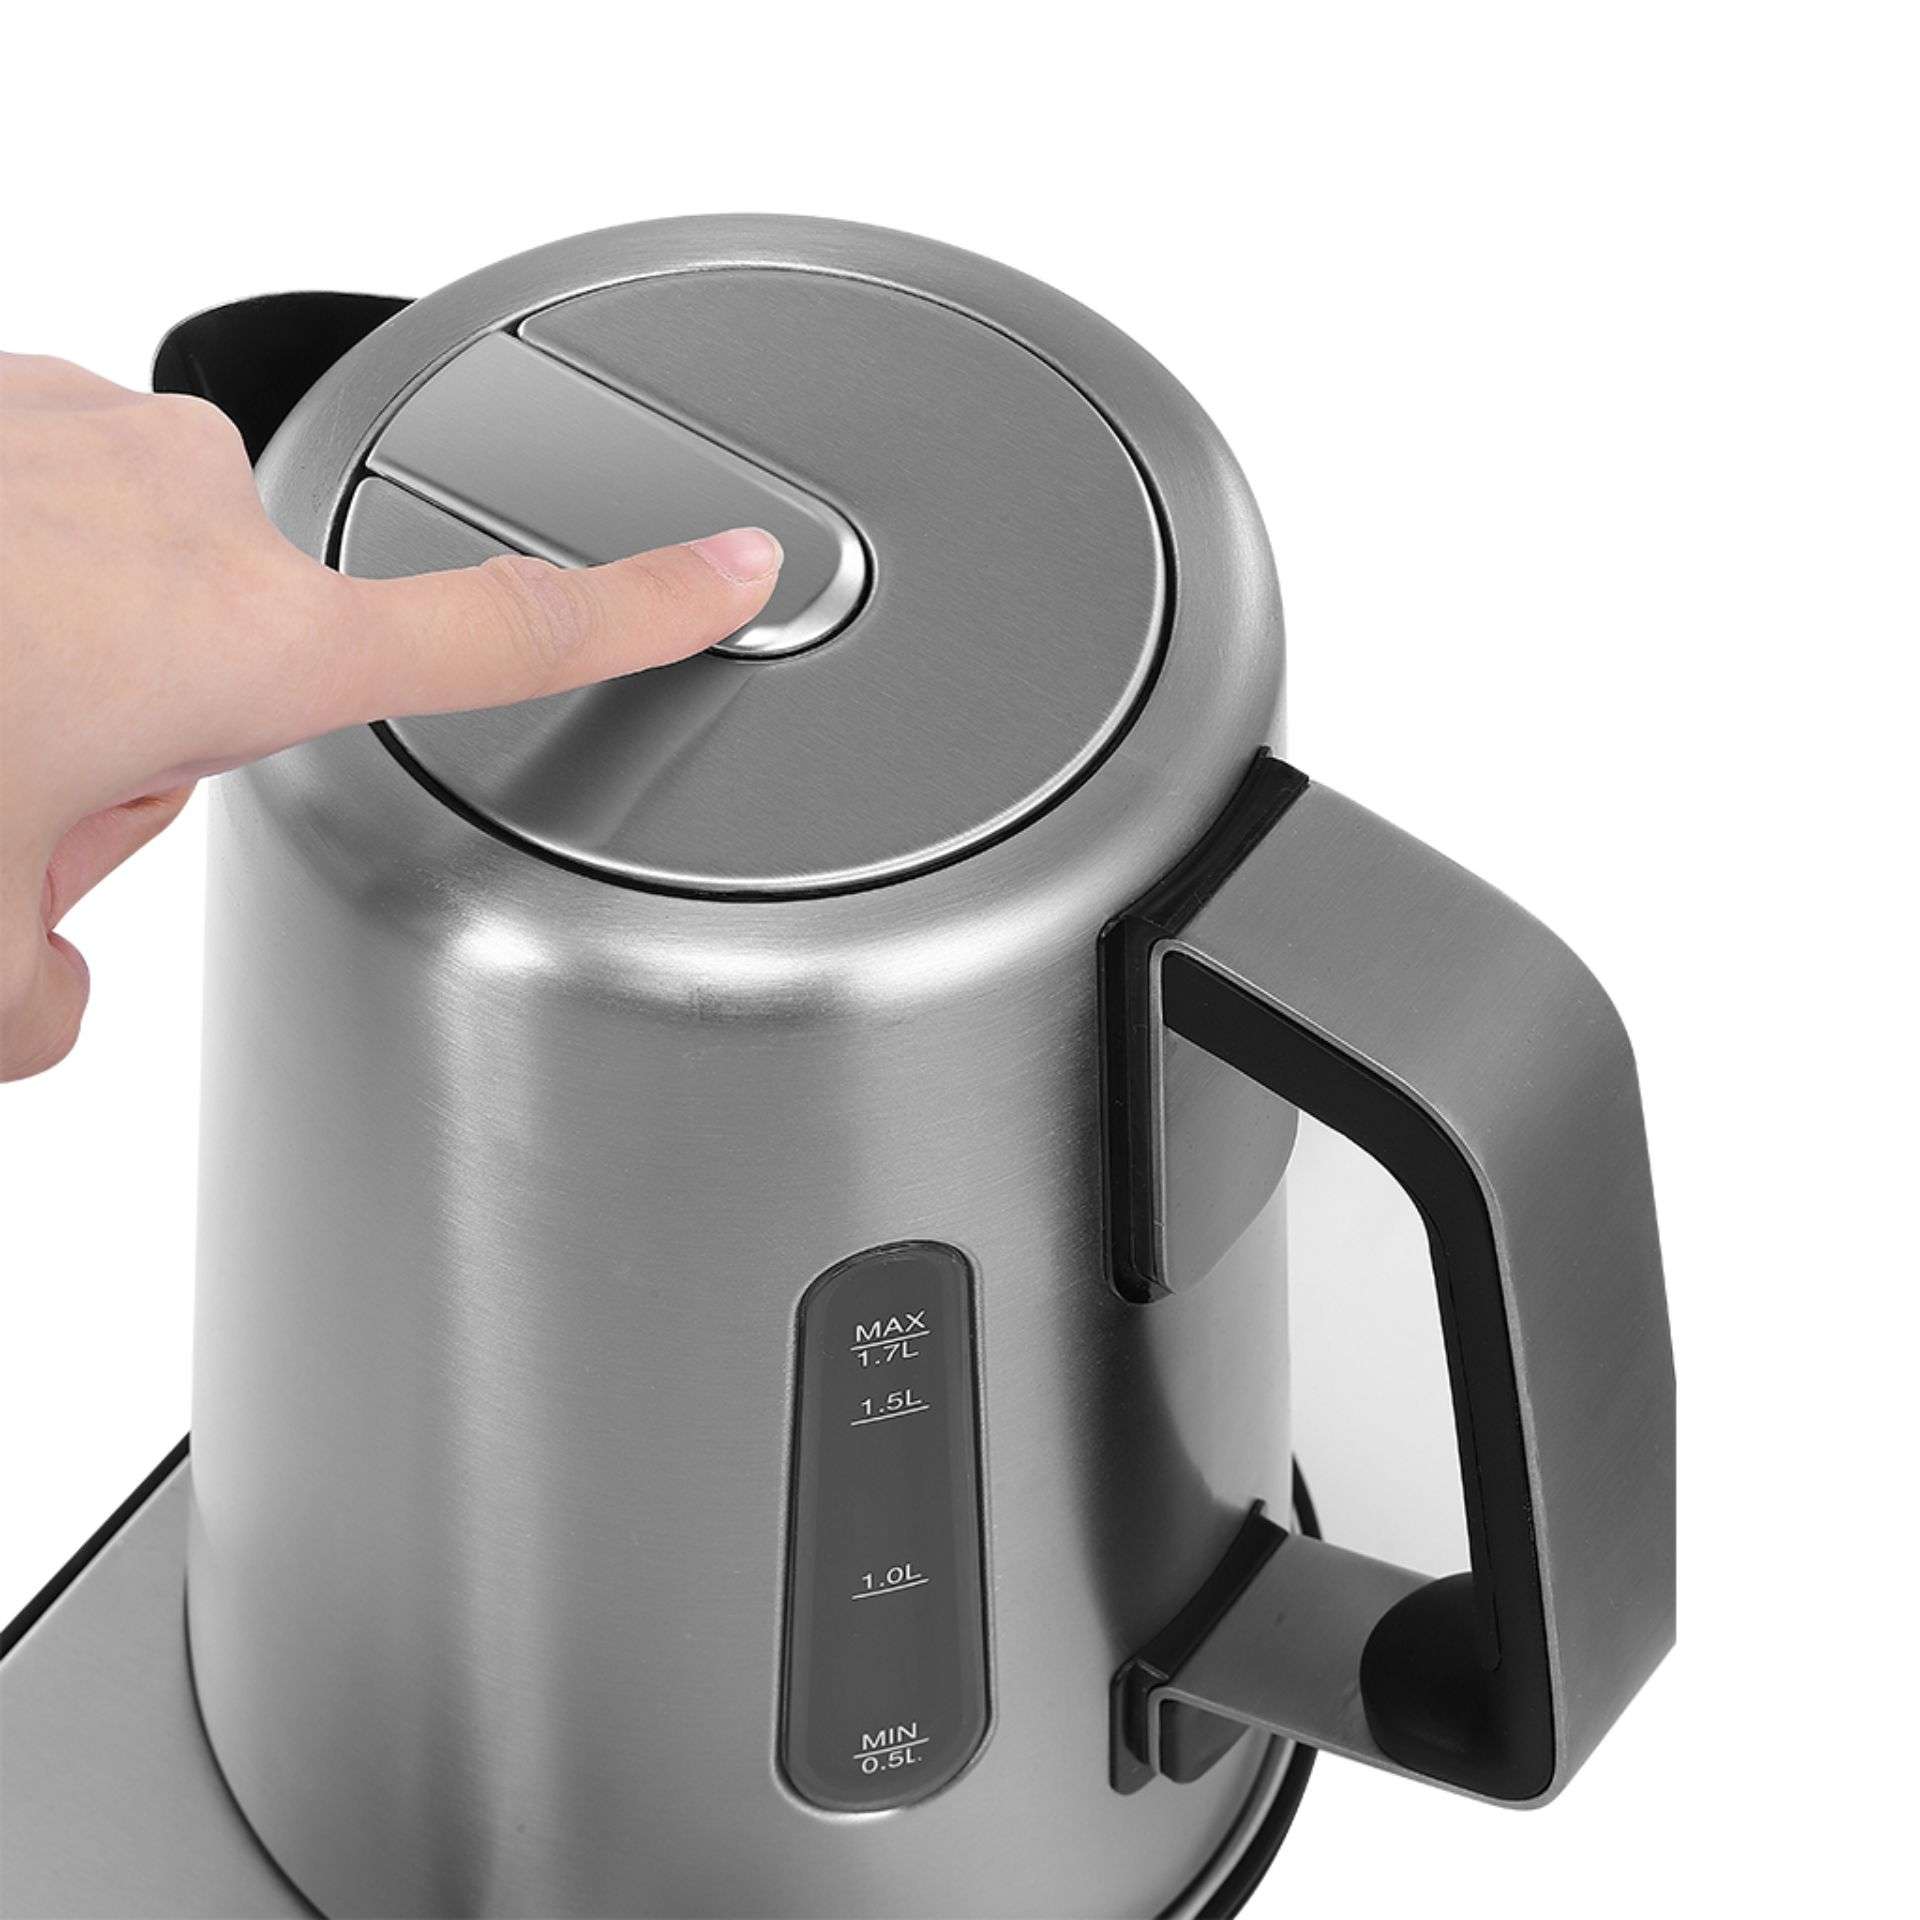 Midea Modern and Elegant Electric Kettle - Stainless Steel - Auto